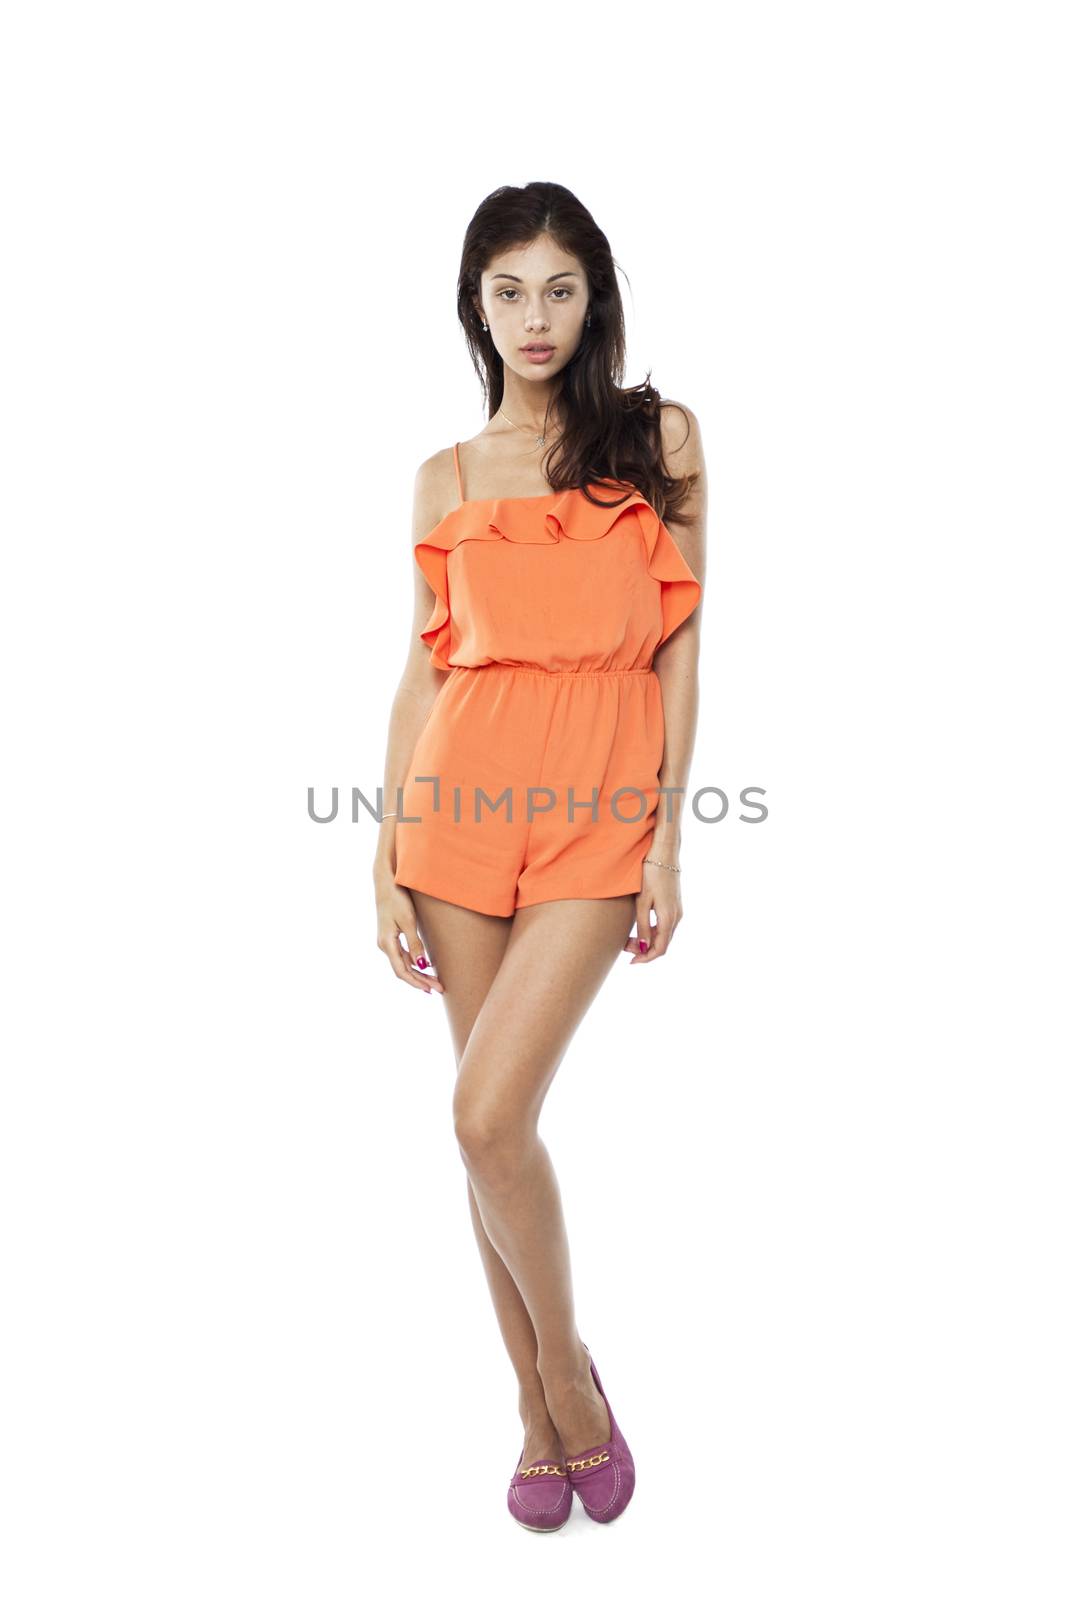 Portrait of sexy woman in orange dress, isolated on white